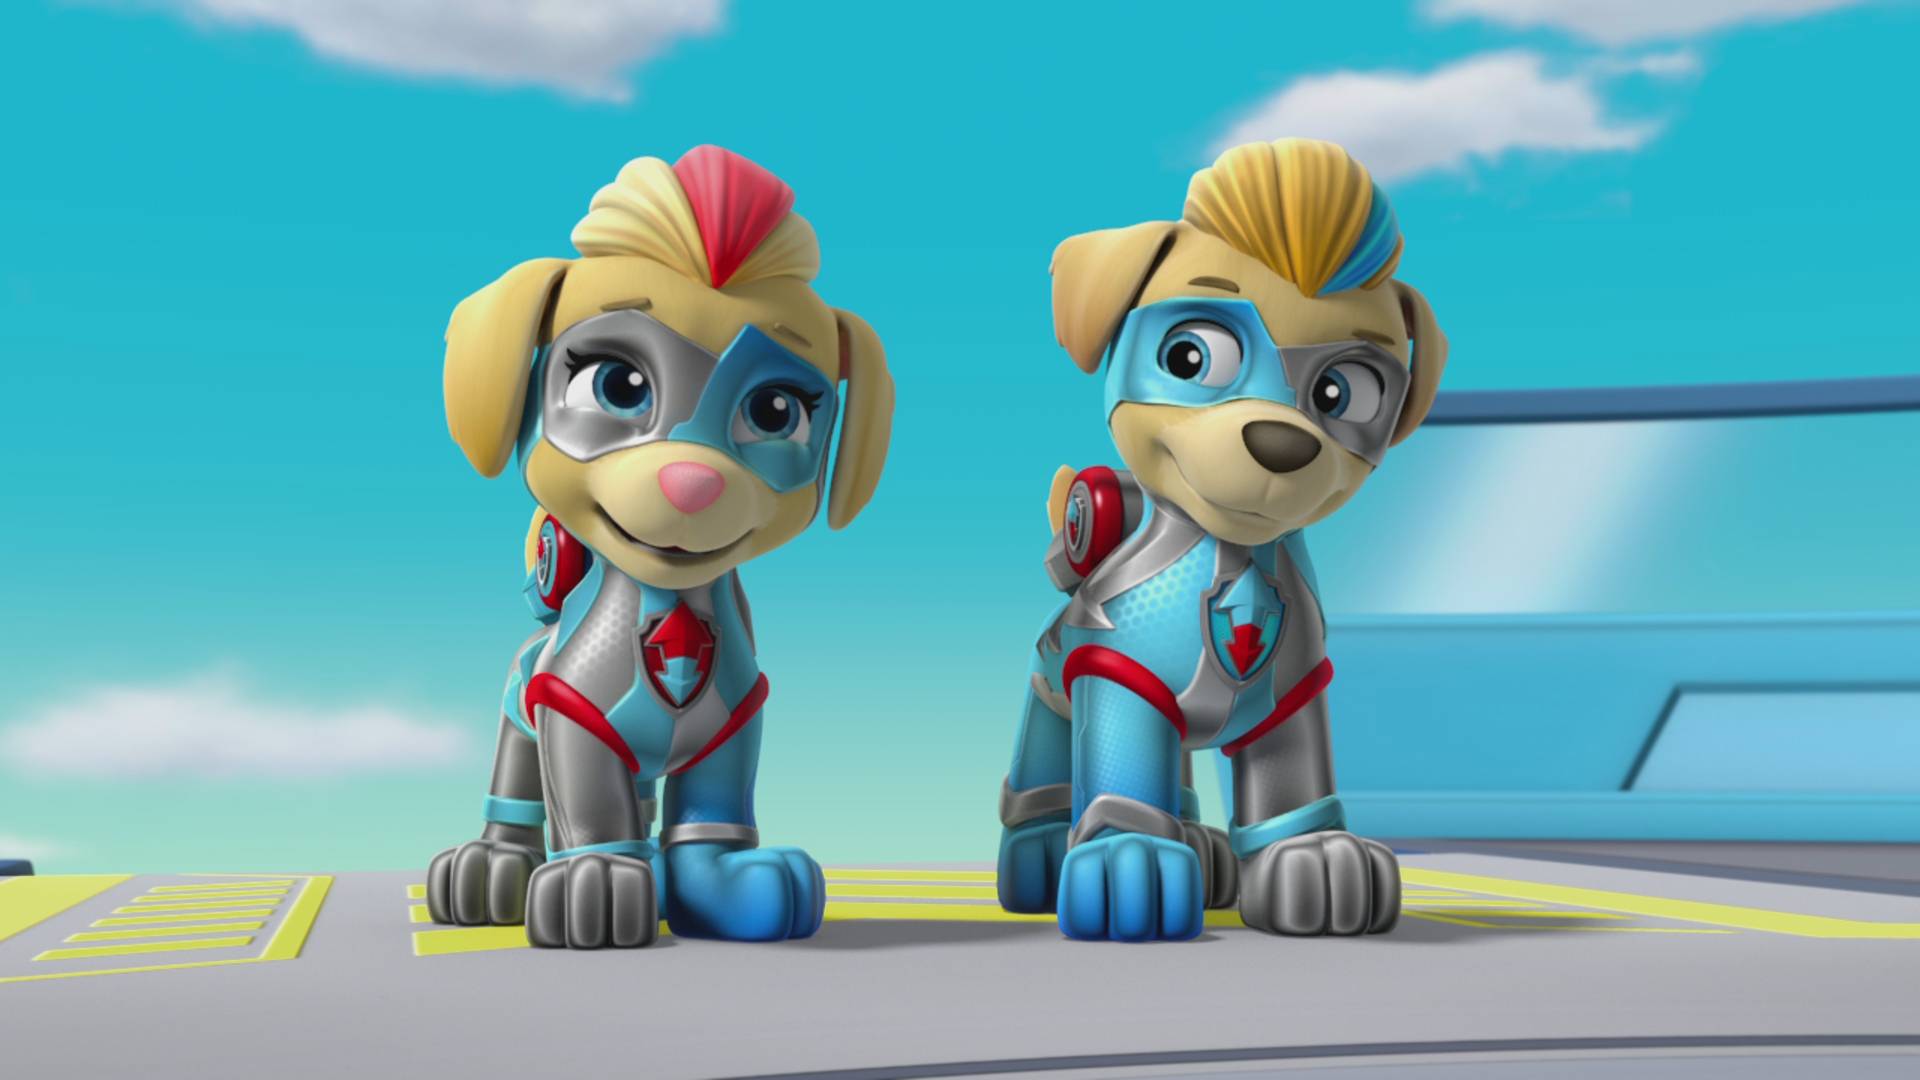 This Pup is ready - Image 1 from Name That PAW Patrol Pup!